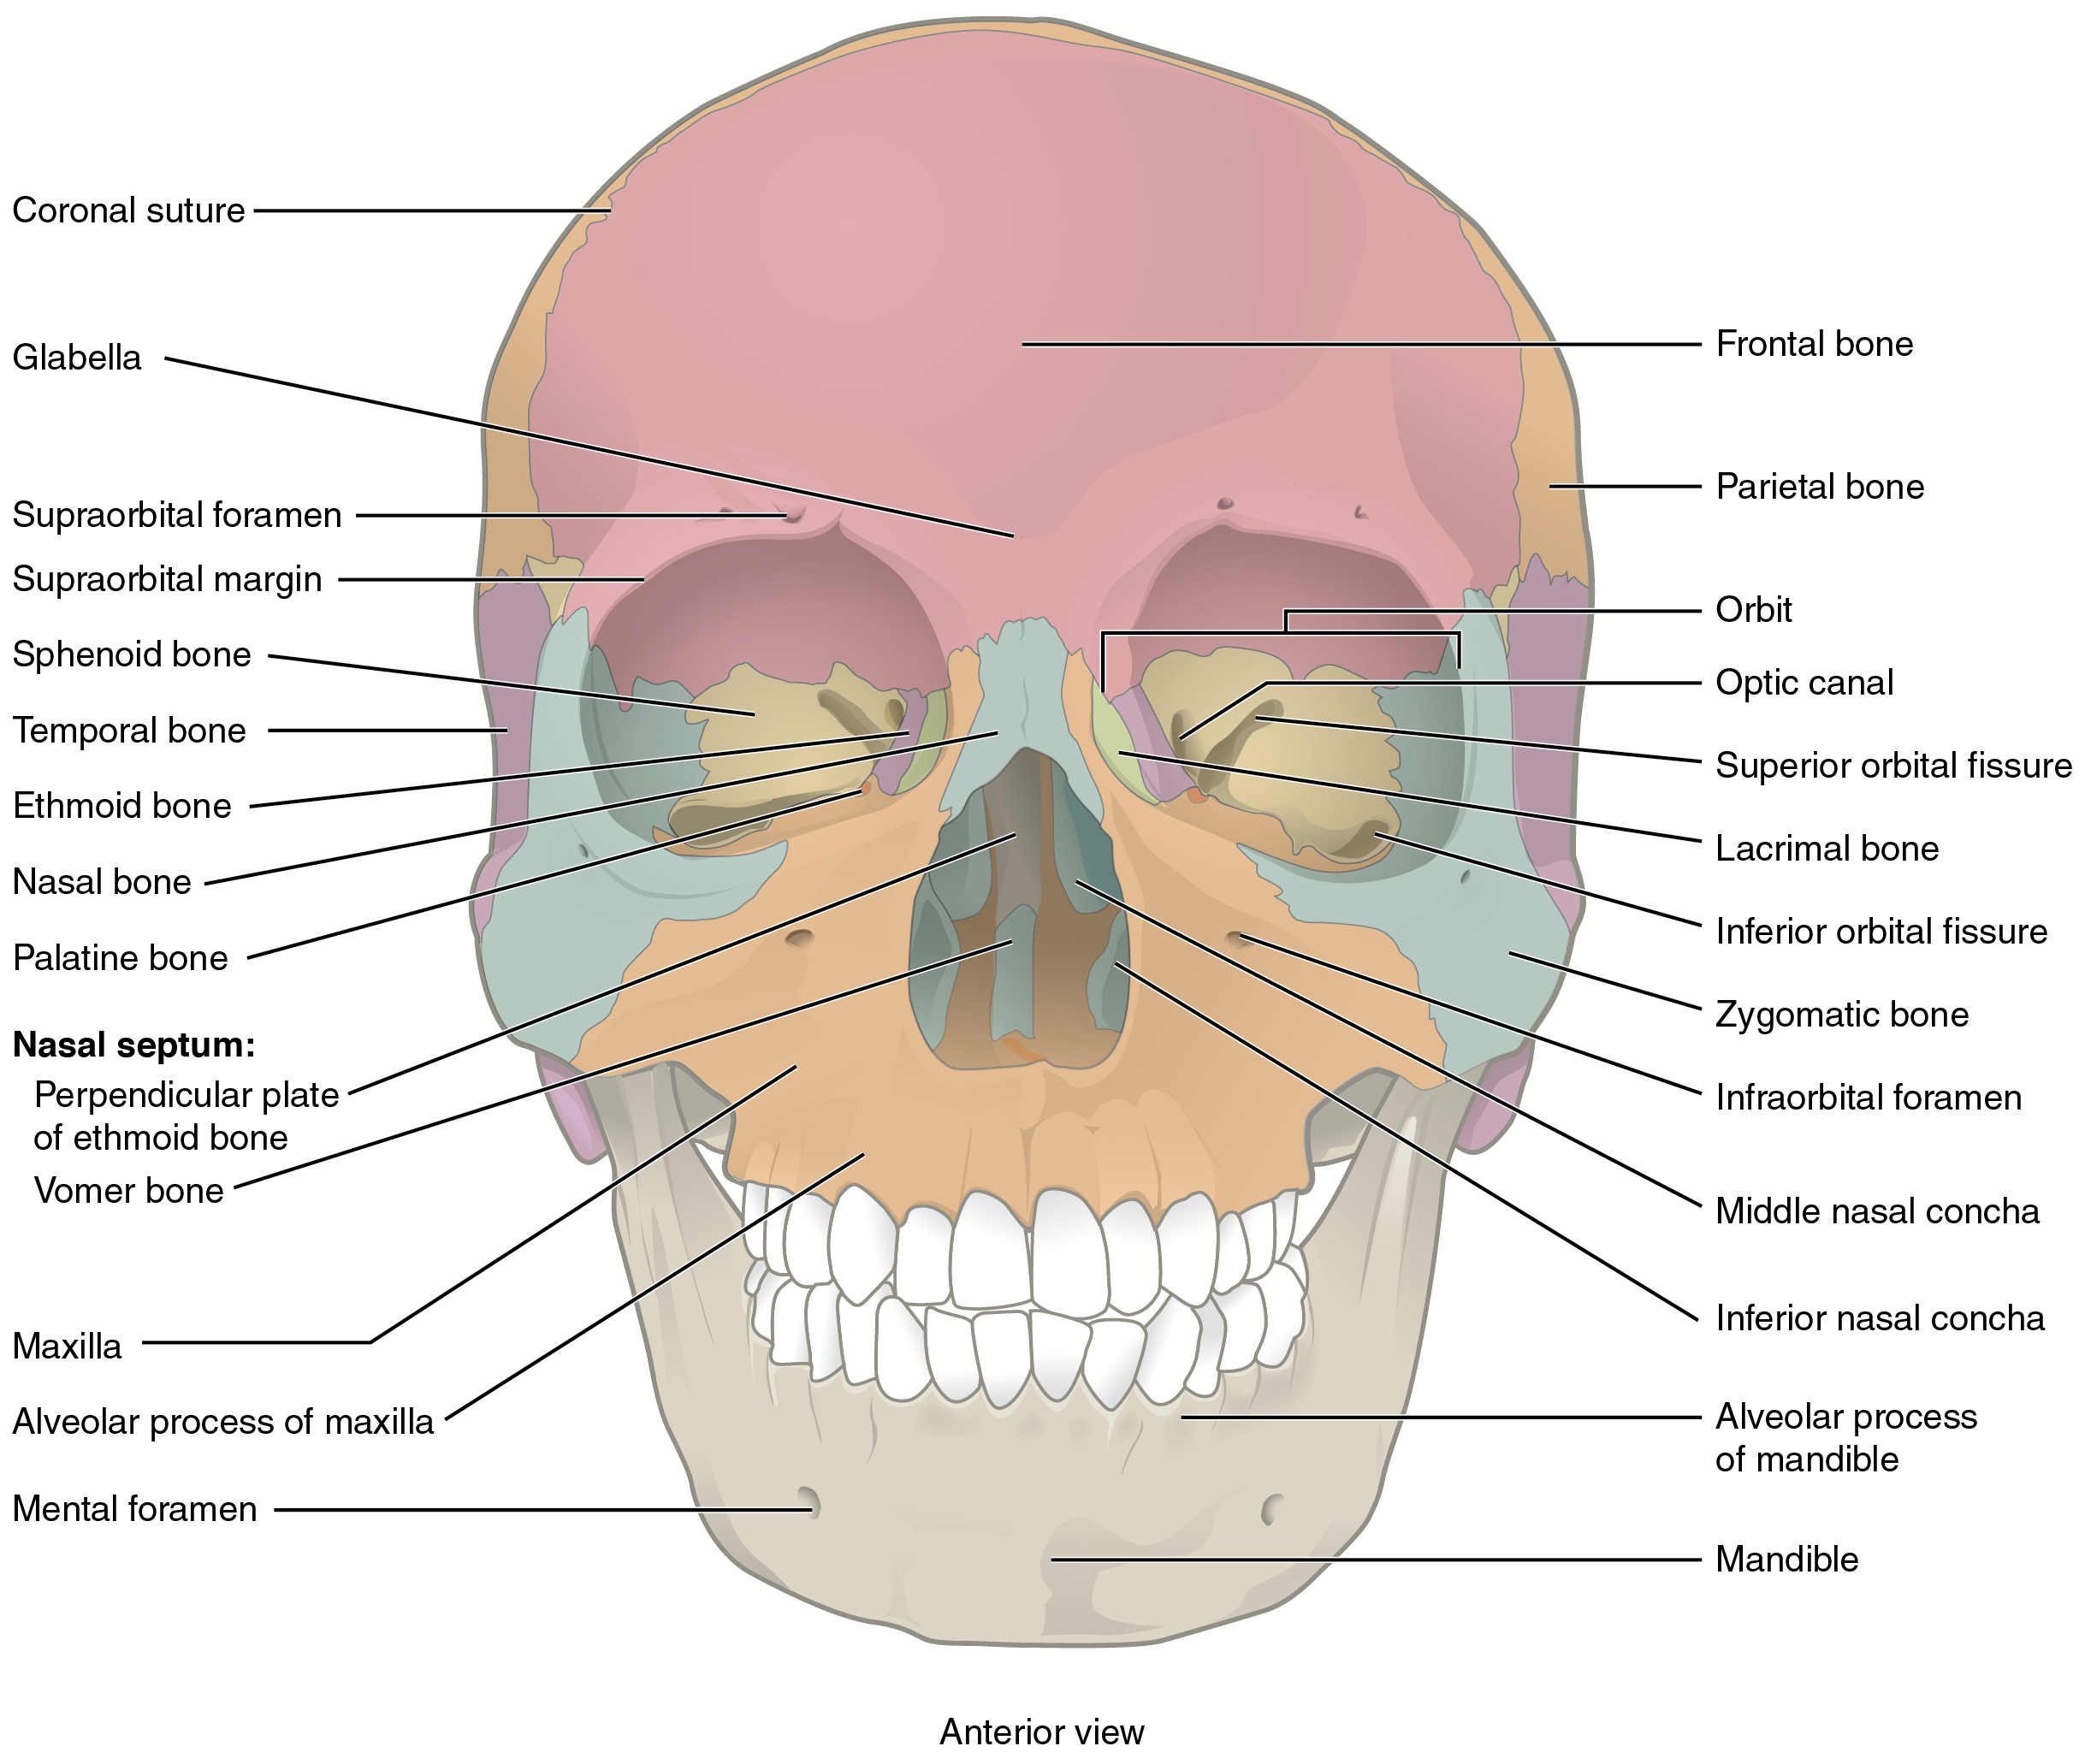 This Image Shows The Anterior View From The Front Of The Human Skull